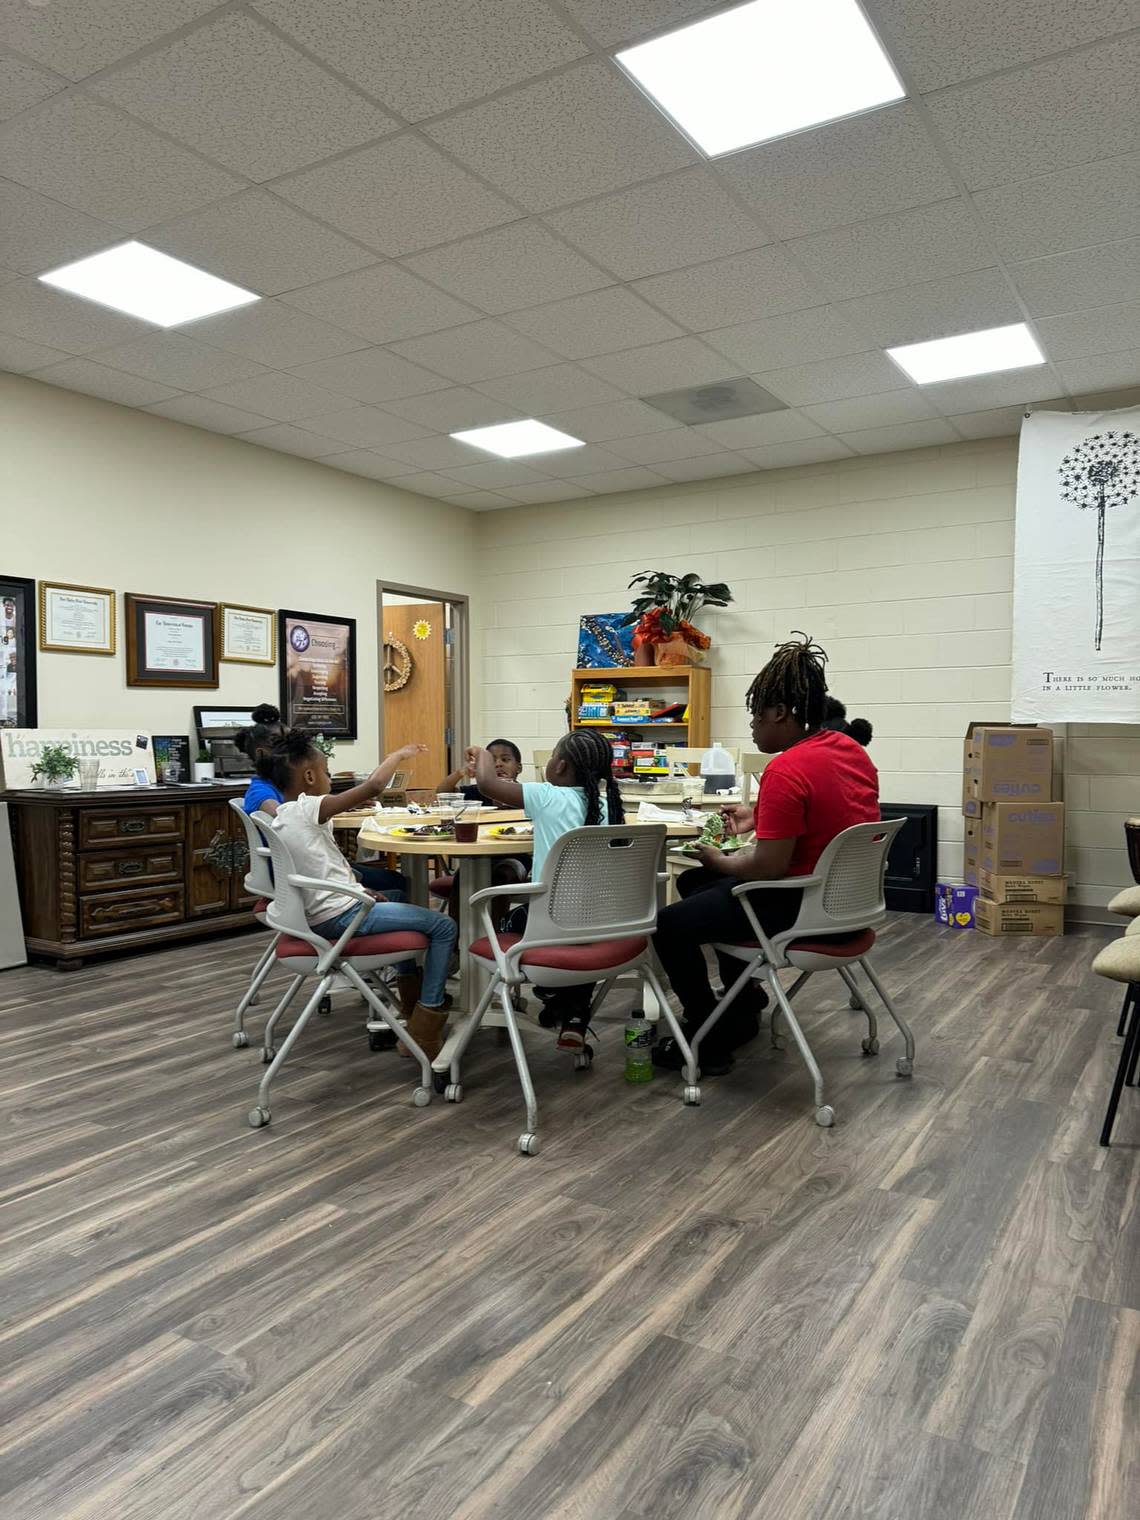 Every Wednesday at 4 p.m. at the Booker T. Washington Center, the Choosing Peace program teaches Macon-Bibb County kids about peaceful conflict resolution in an effort to reduce violence and improve mental health. Macon Mental Health Matters